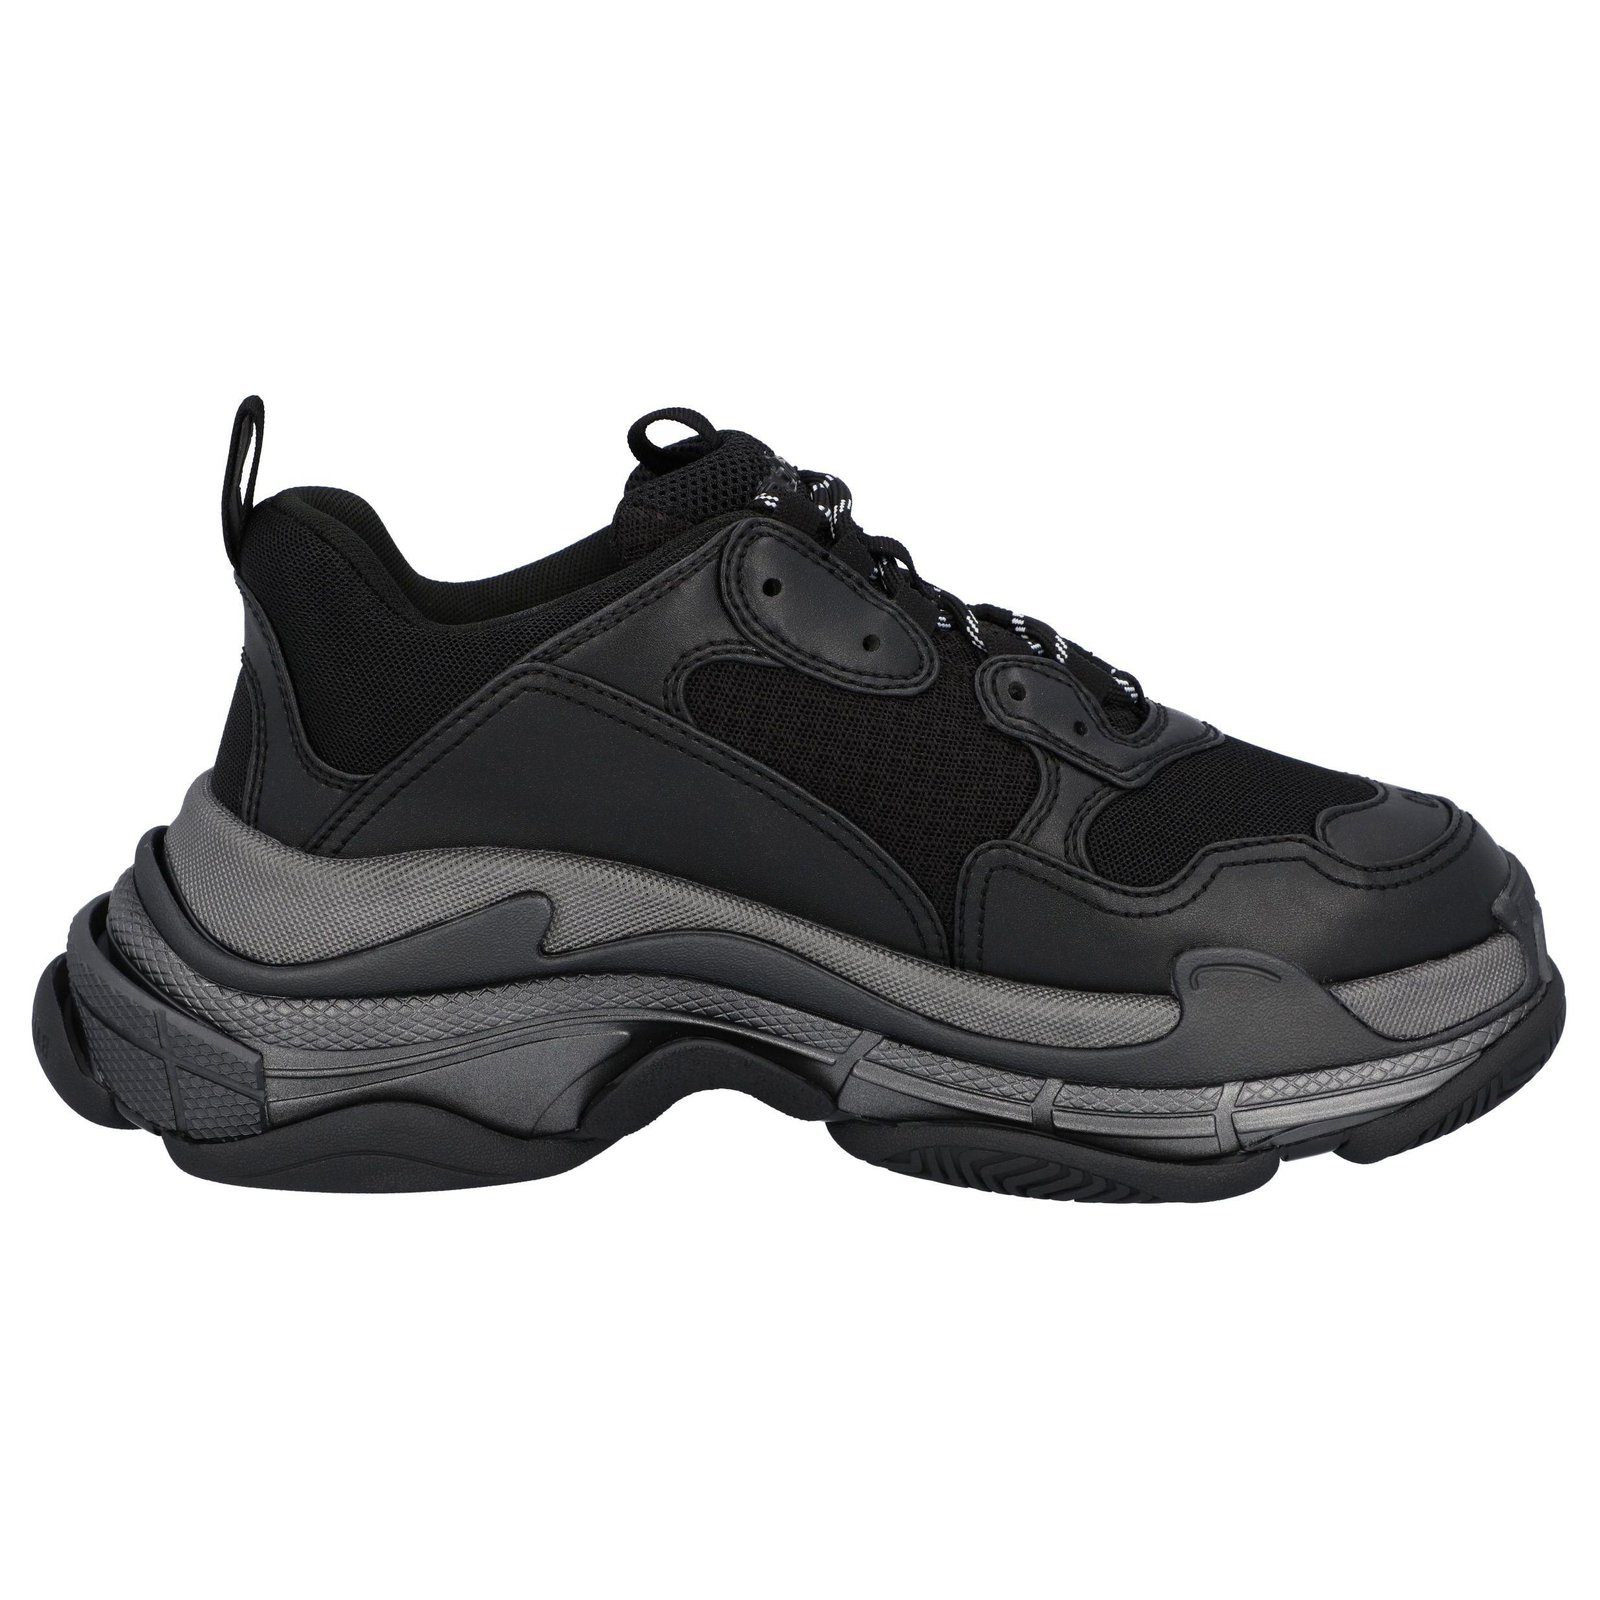 Triple S Sneaker in Black Faux leather and mesh upper